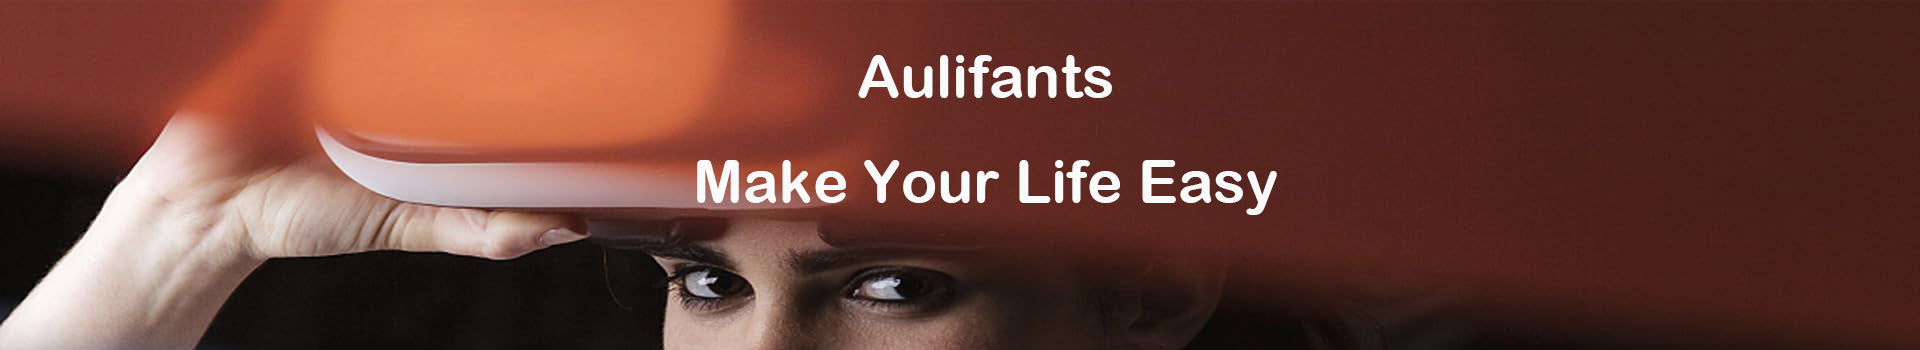 aulifants story